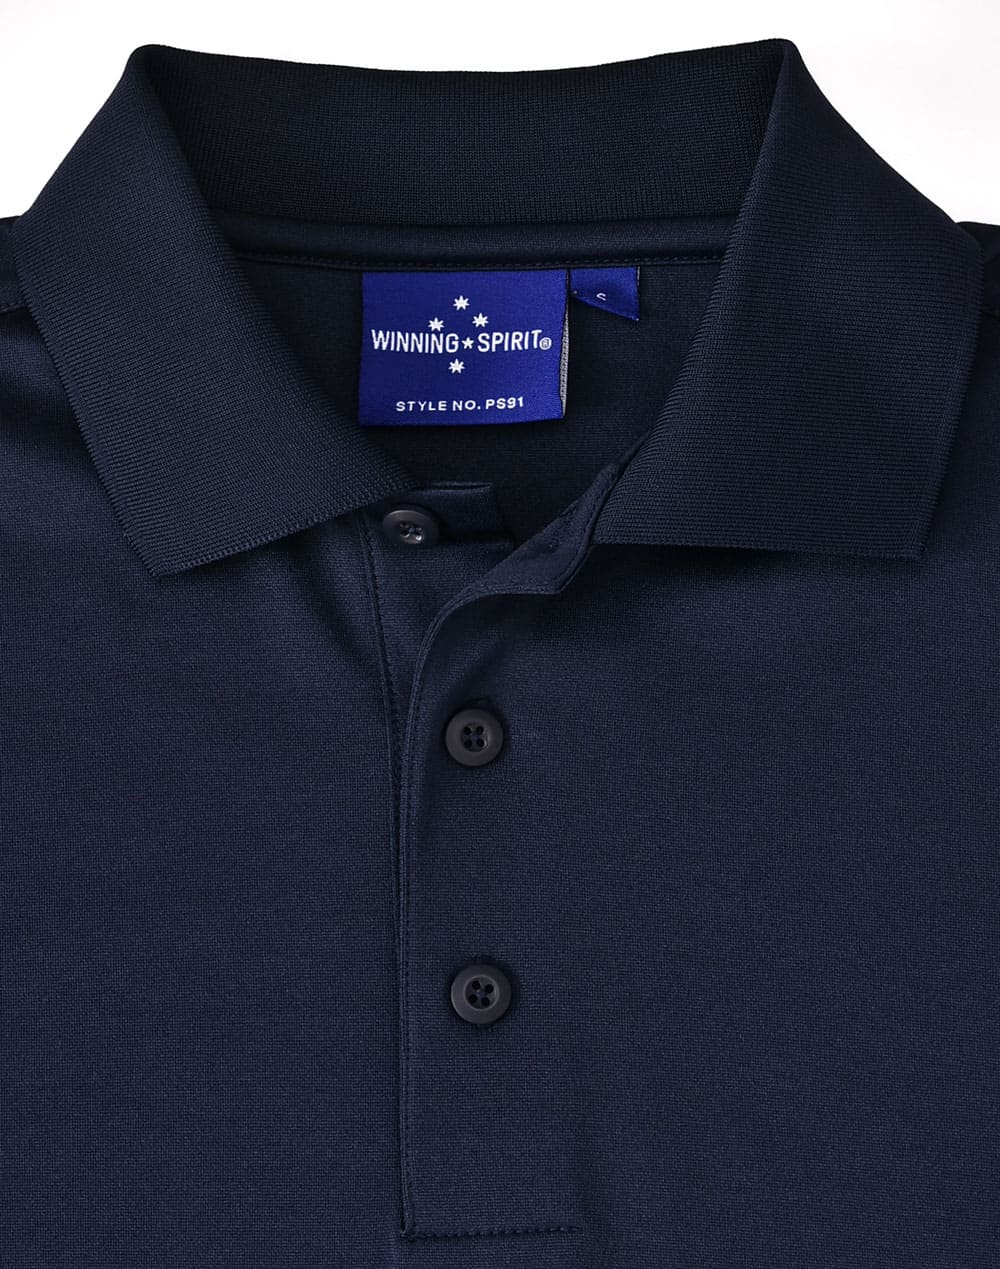 Personalized Men's Corporate Branded Polo Shirts Online Perth Australia